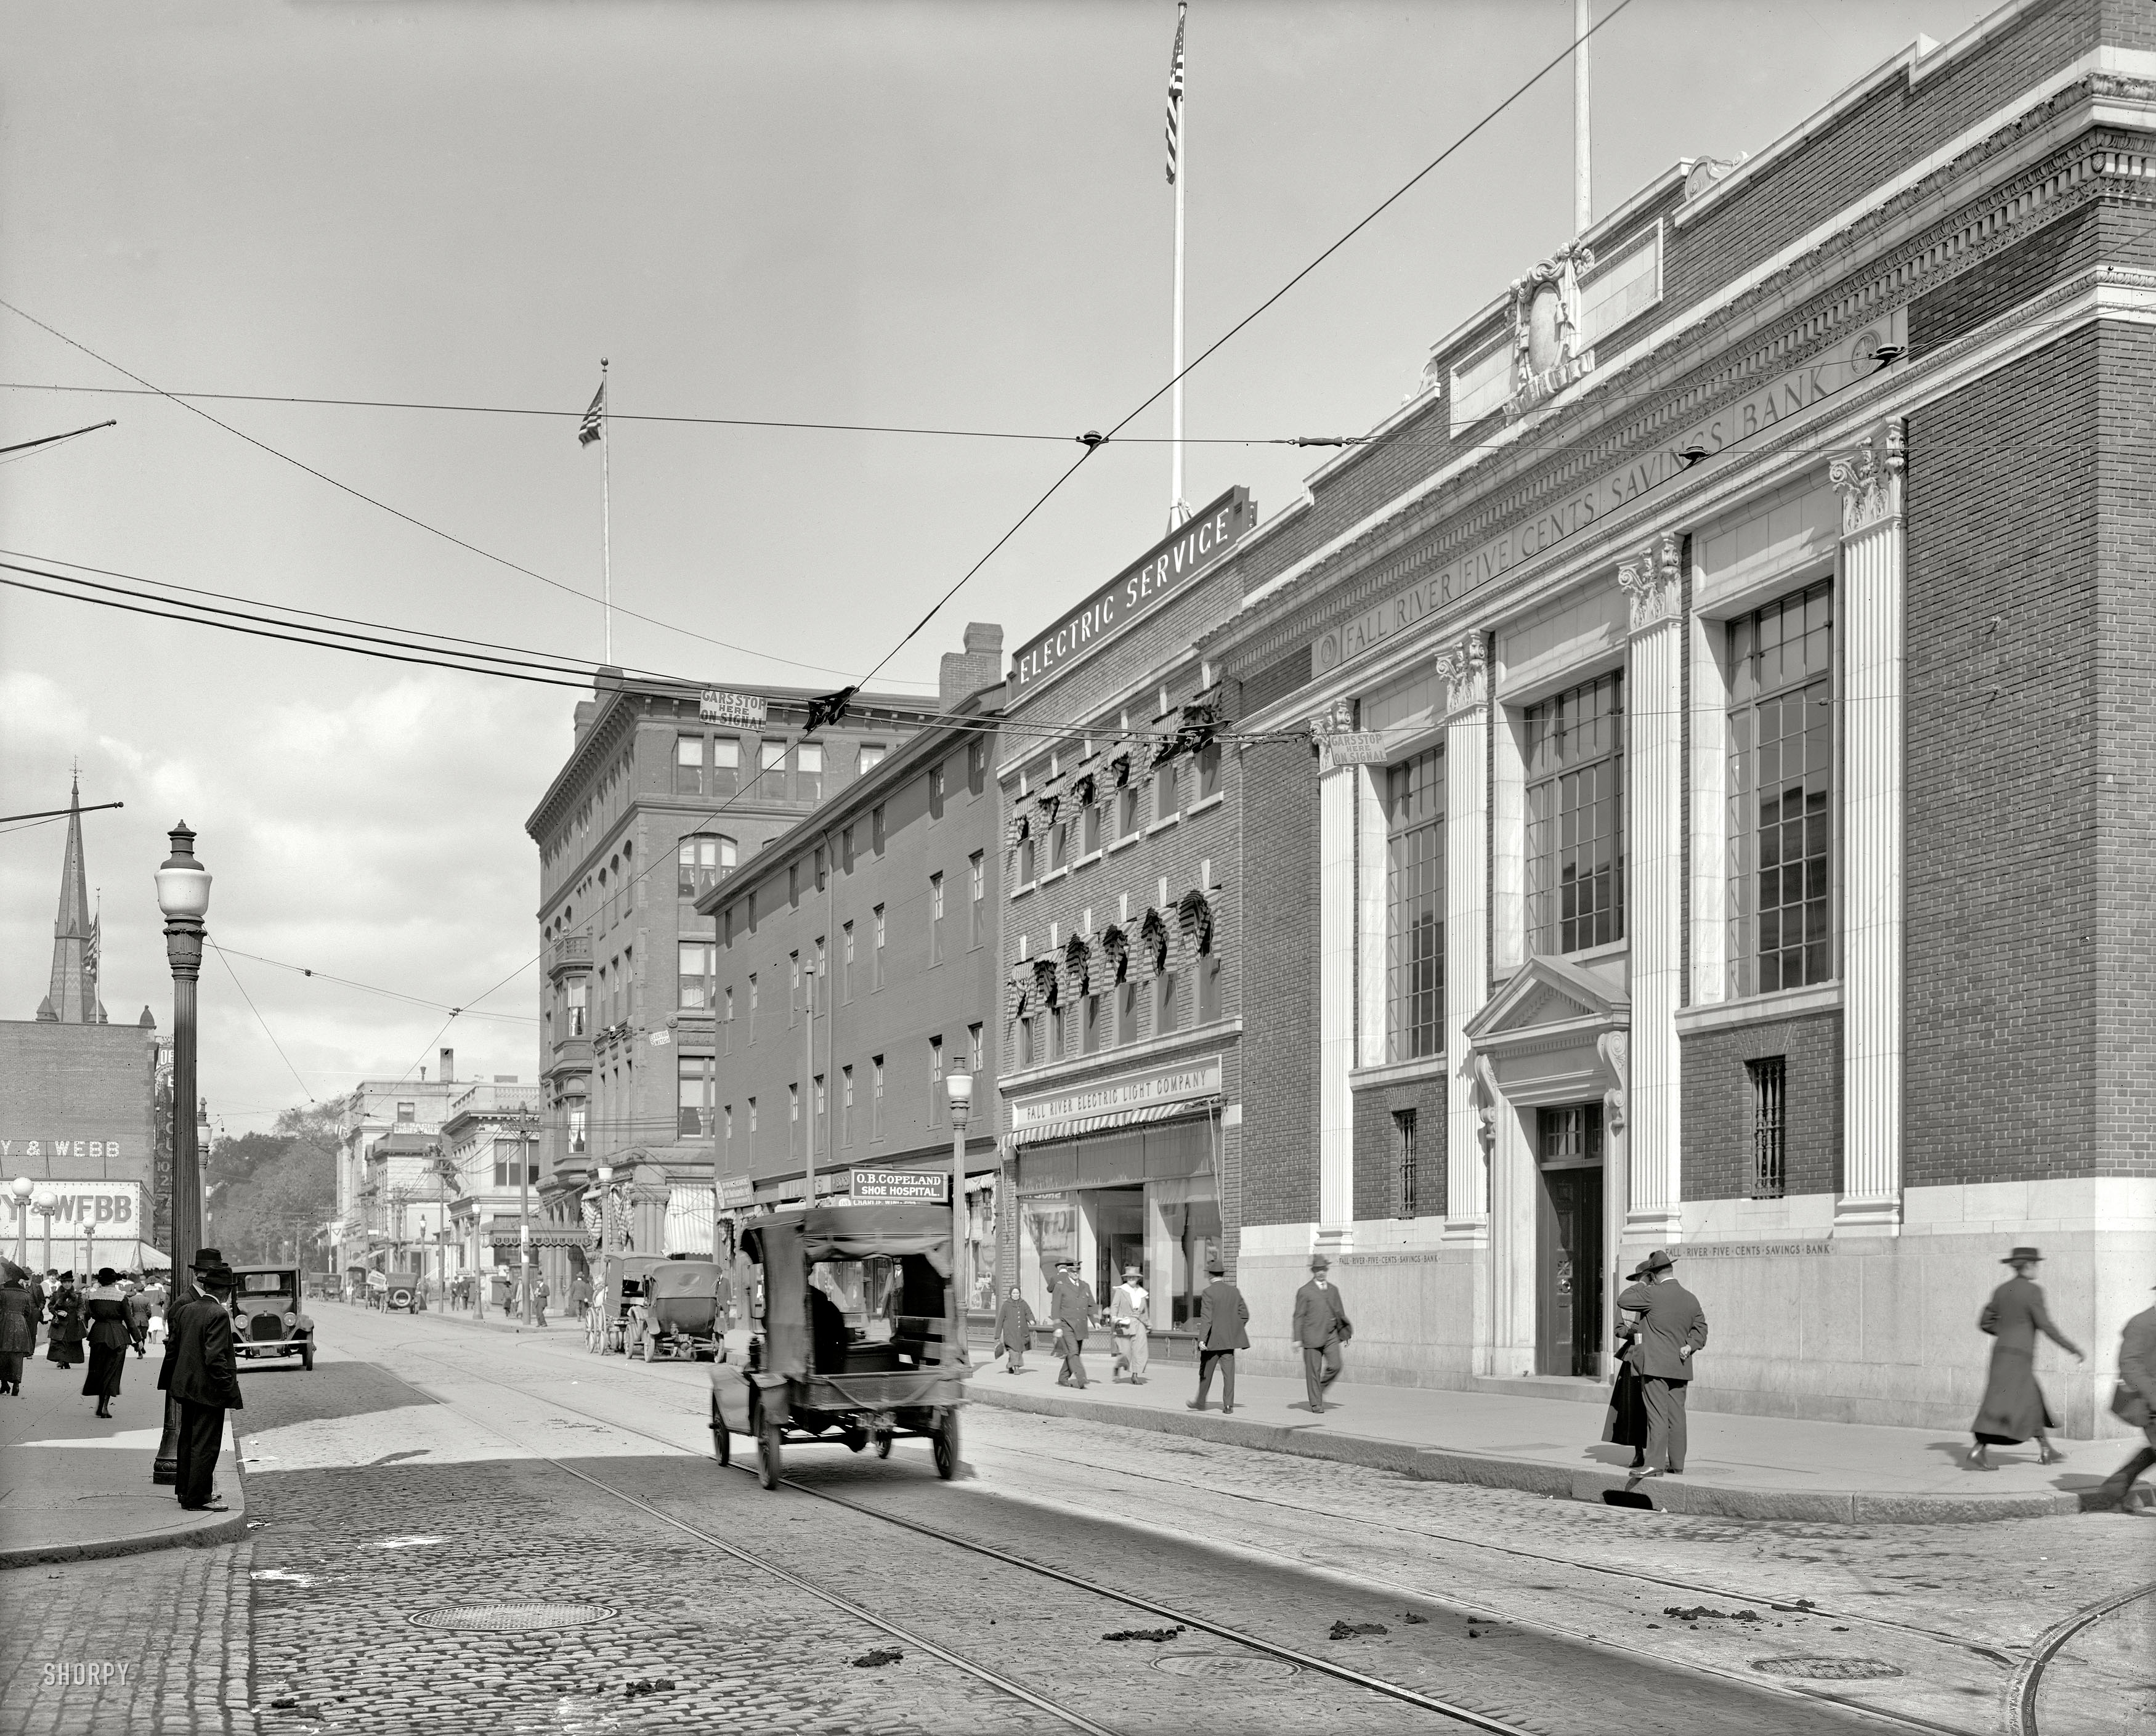 Circa 1915, another look at Main Street in Fall River, Massachusetts. Where the Shoe Hospital and Five Cents Savings Bank are mere steps apart. 8x10 inch dry plate glass negative, Detroit Publishing Company. View full size.